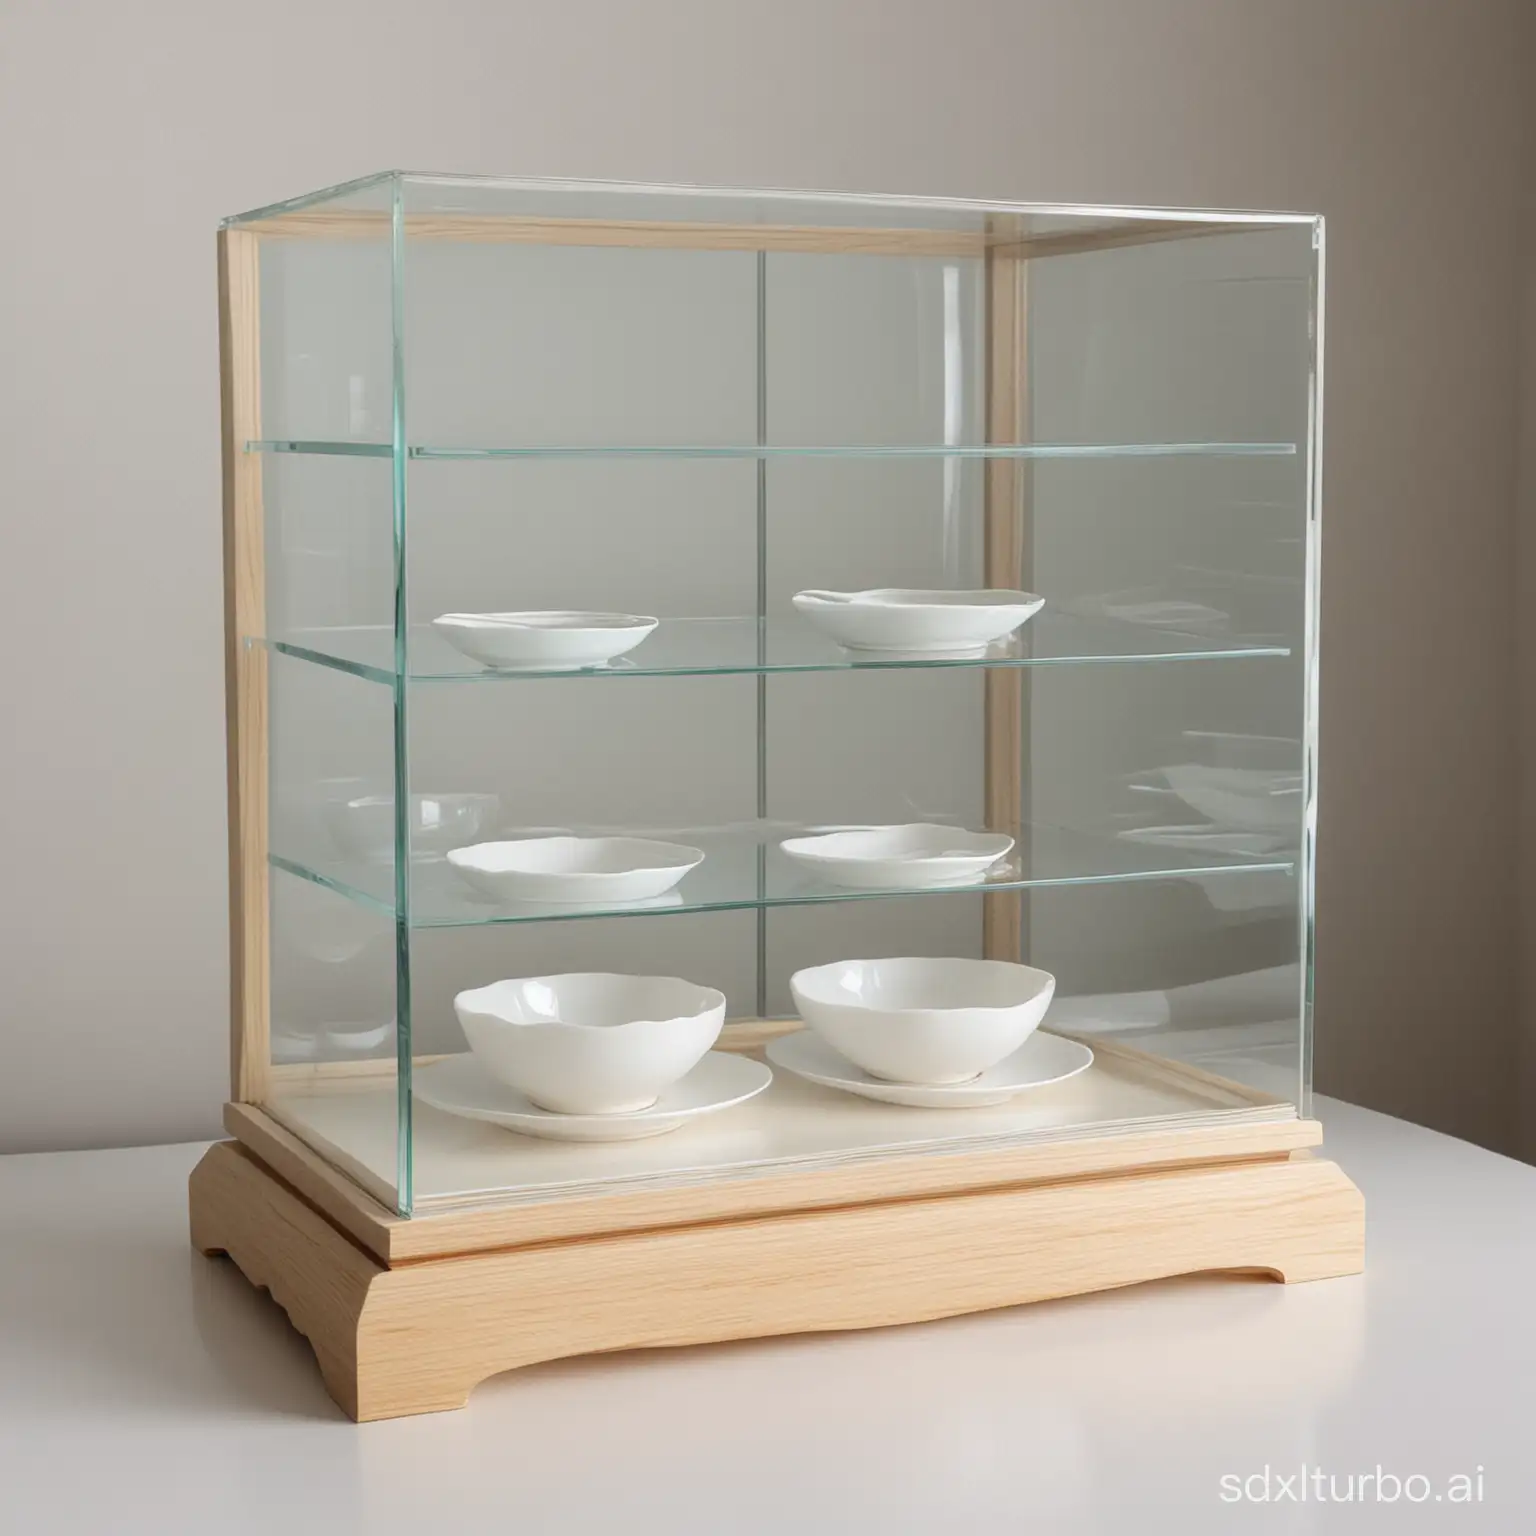 A glass display case, approximately 30cm tall, with only one layer, not two layers, can be very long, and the back is opaque white. Inside the glass cabinet, there is a white noodle bowl, a white rice bowl, a white plate, and a white cup.